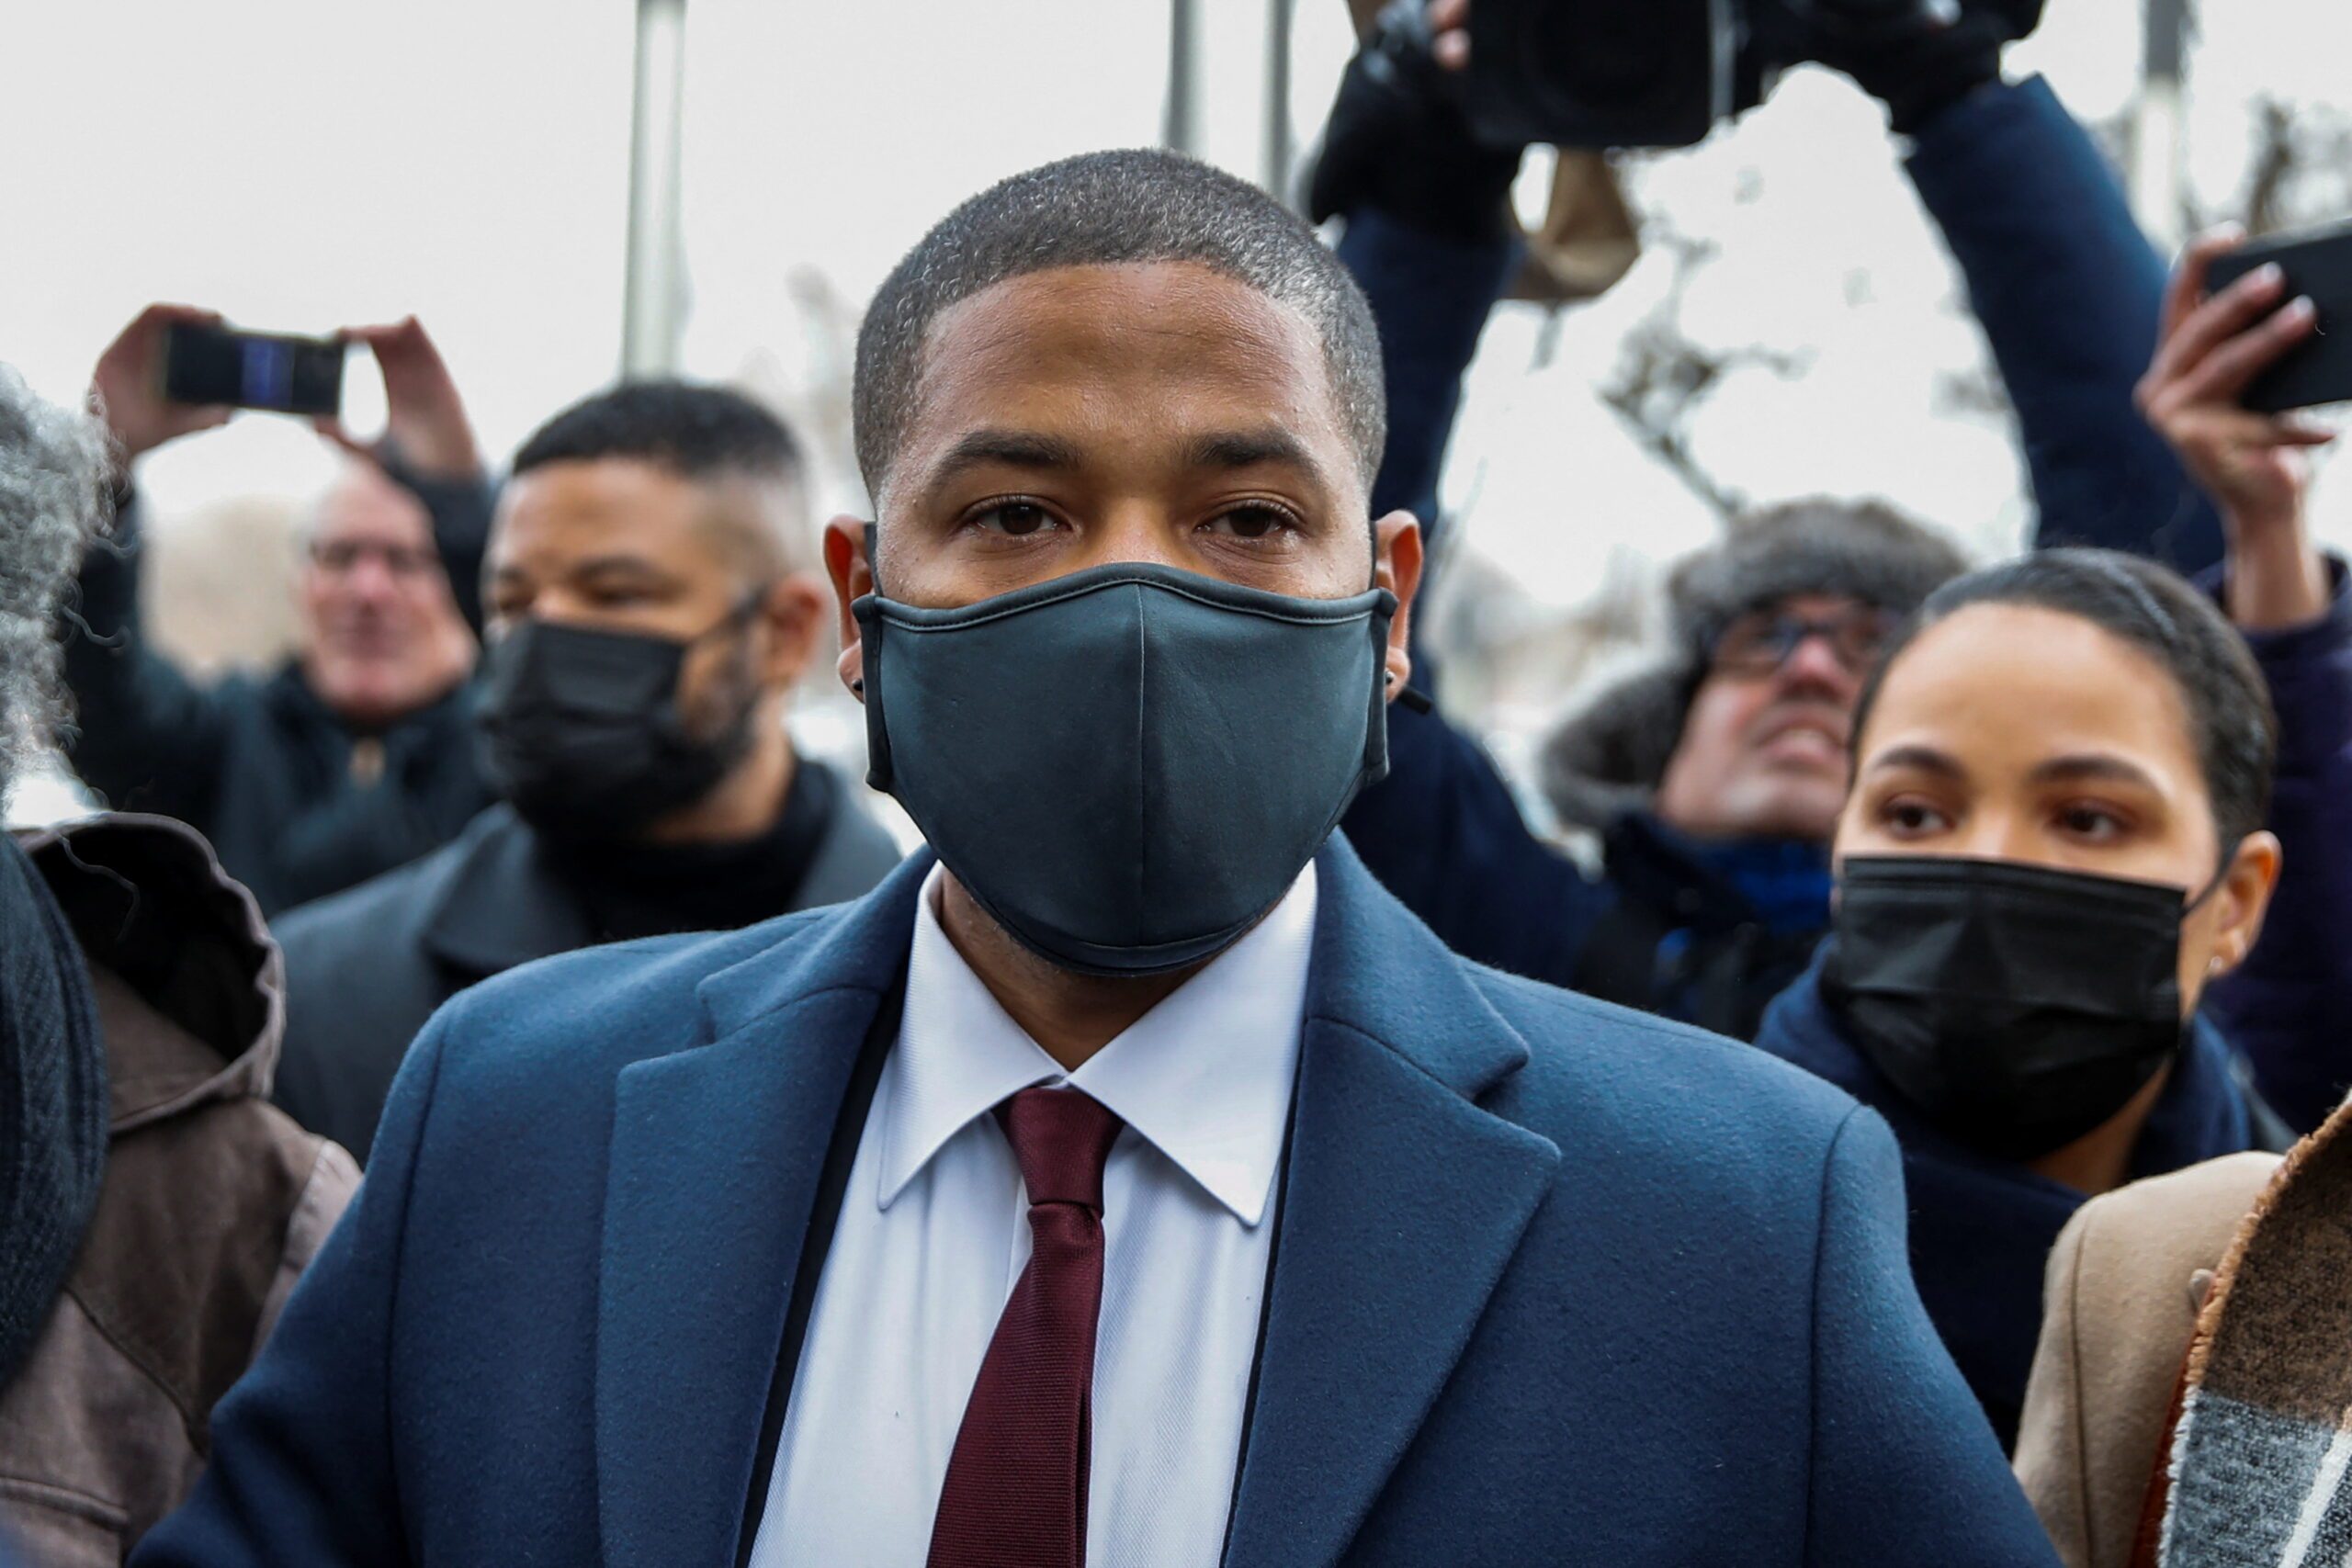 Actor Jussie Smollett sentenced to jail time, probation for staging hate crime